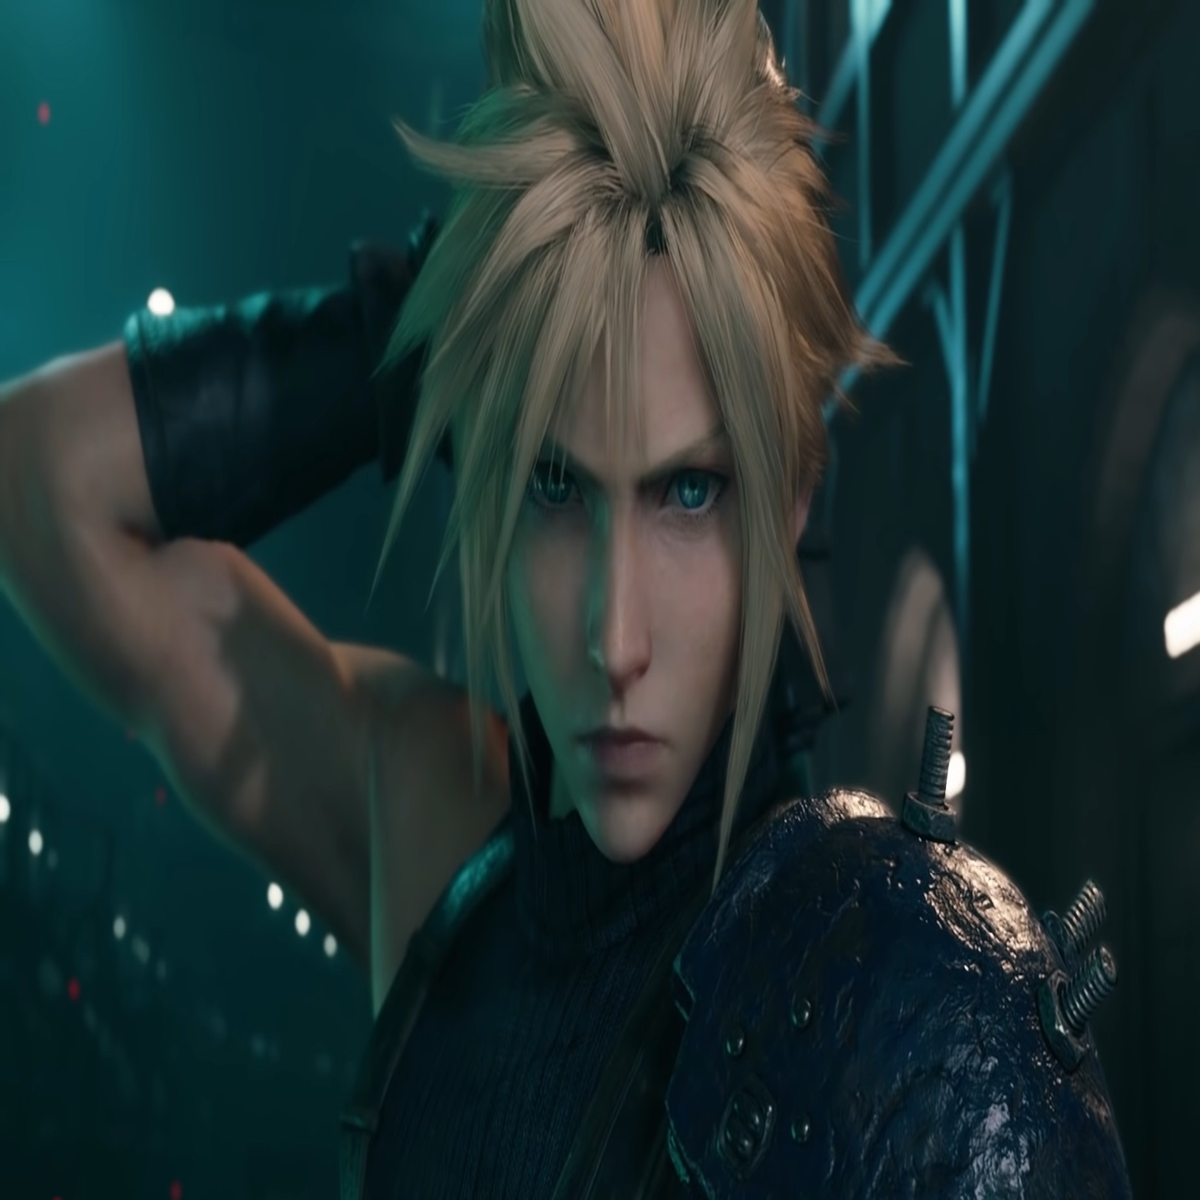 Square Enix staff have been asking the Final Fantasy head for a Final  Fantasy 6 remake